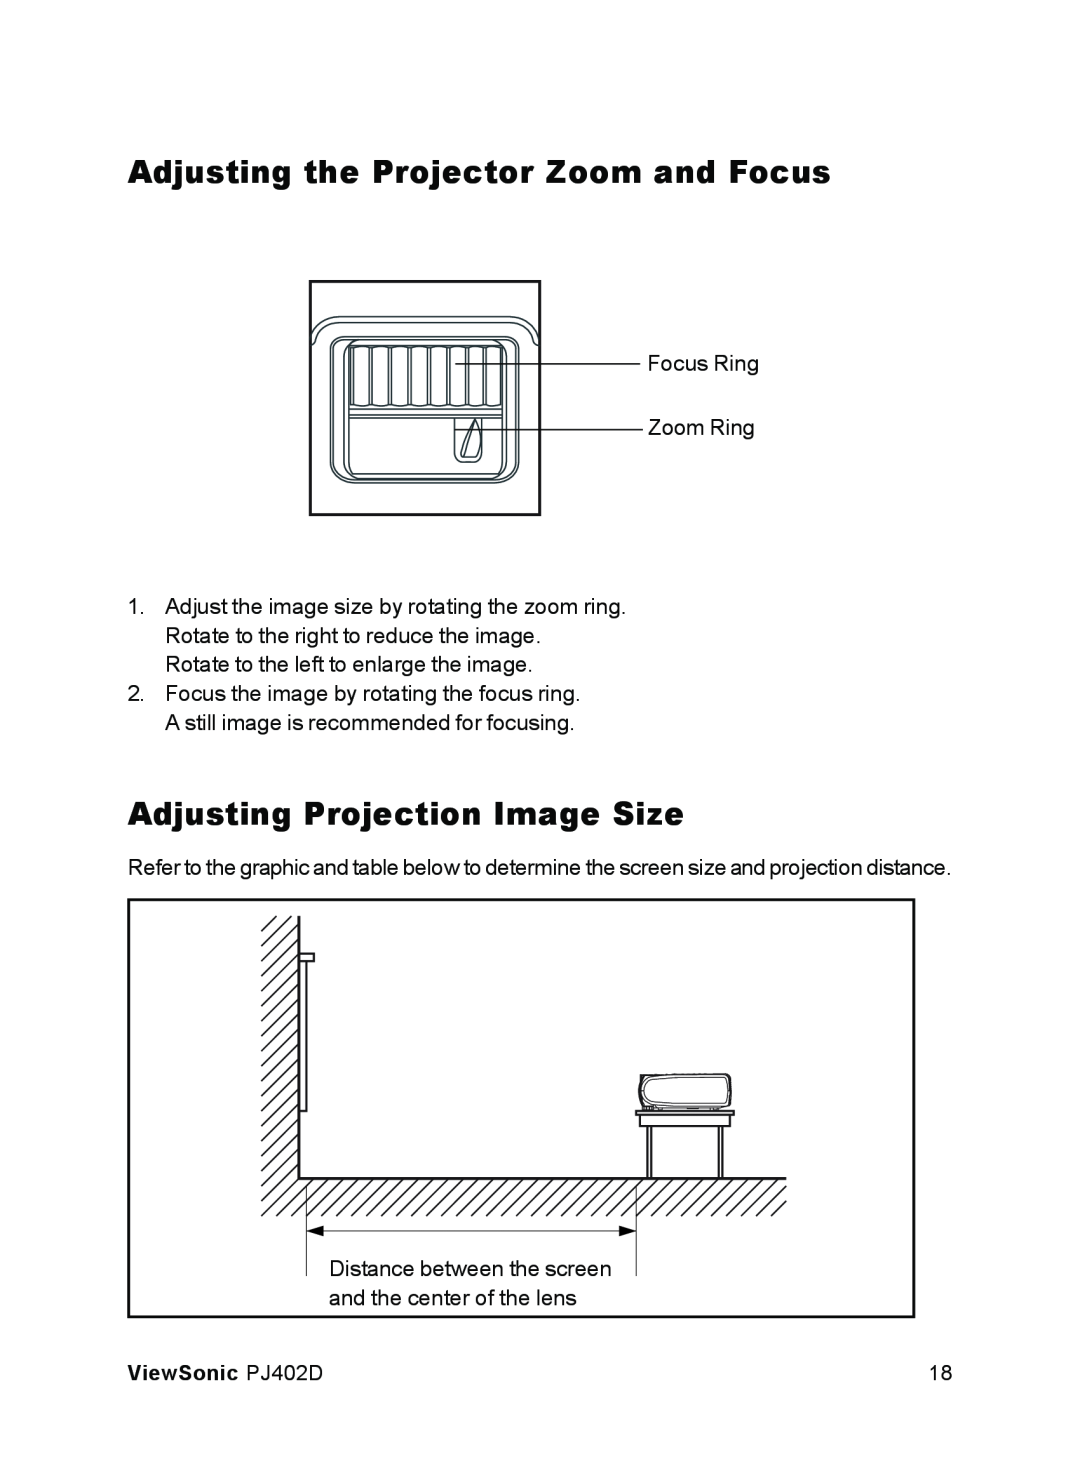 ViewSonic PJ402D manual Adjusting the Projector Zoom and Focus, Adjusting Projection Image Size 